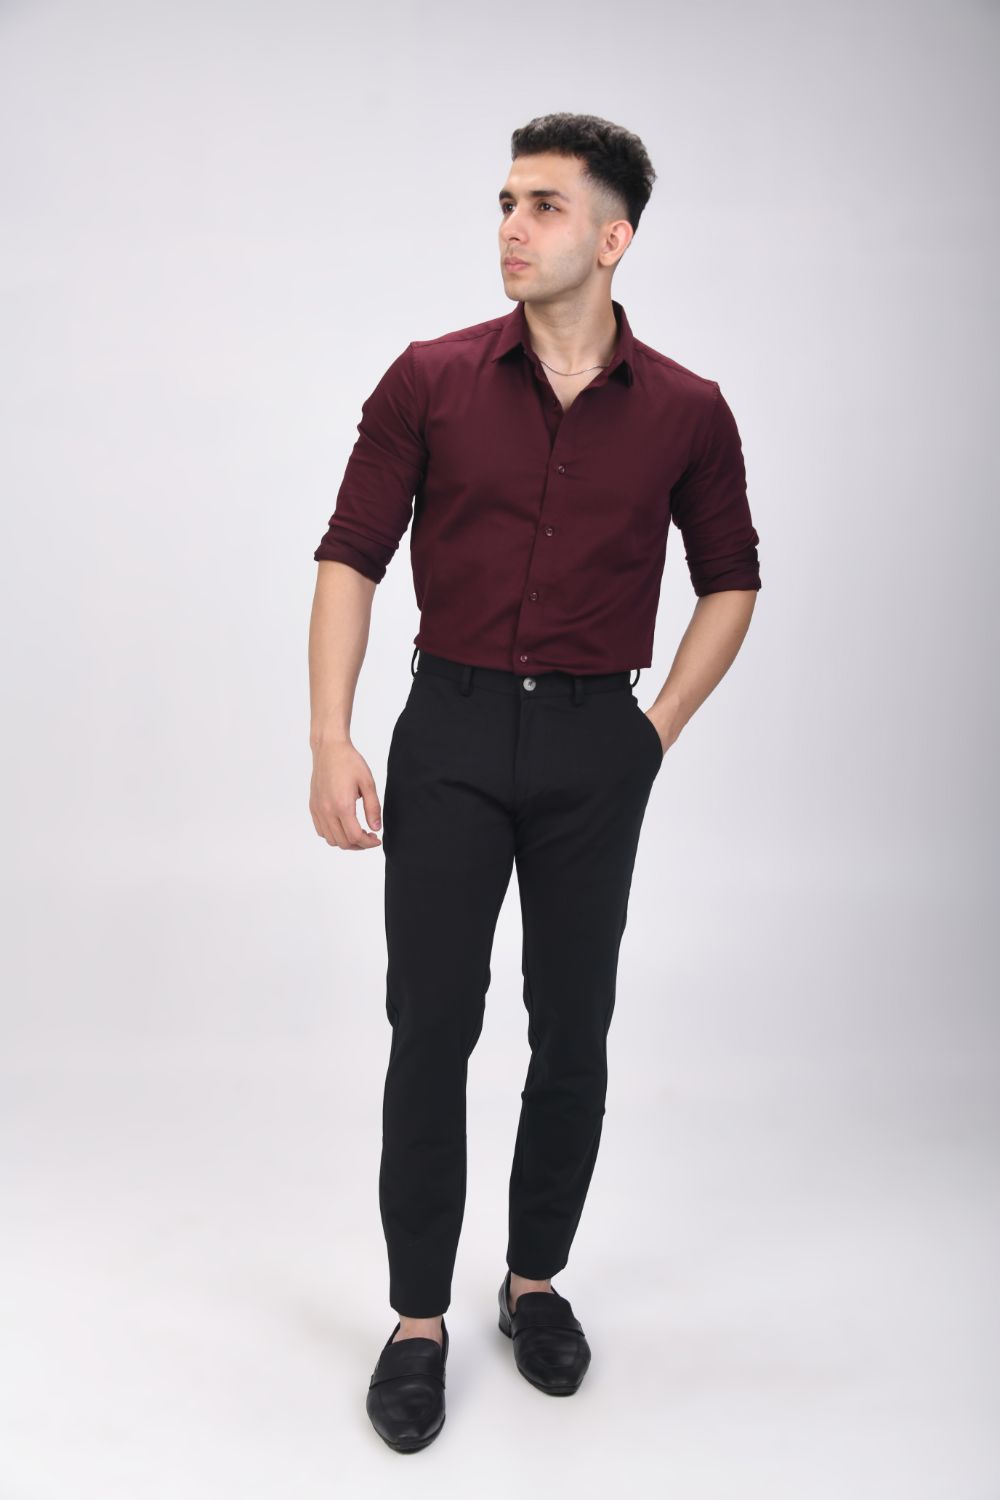 DESQUA- MAROON SHIRT WITH WHITE PIPING DETAIL – Lacquer Embassy